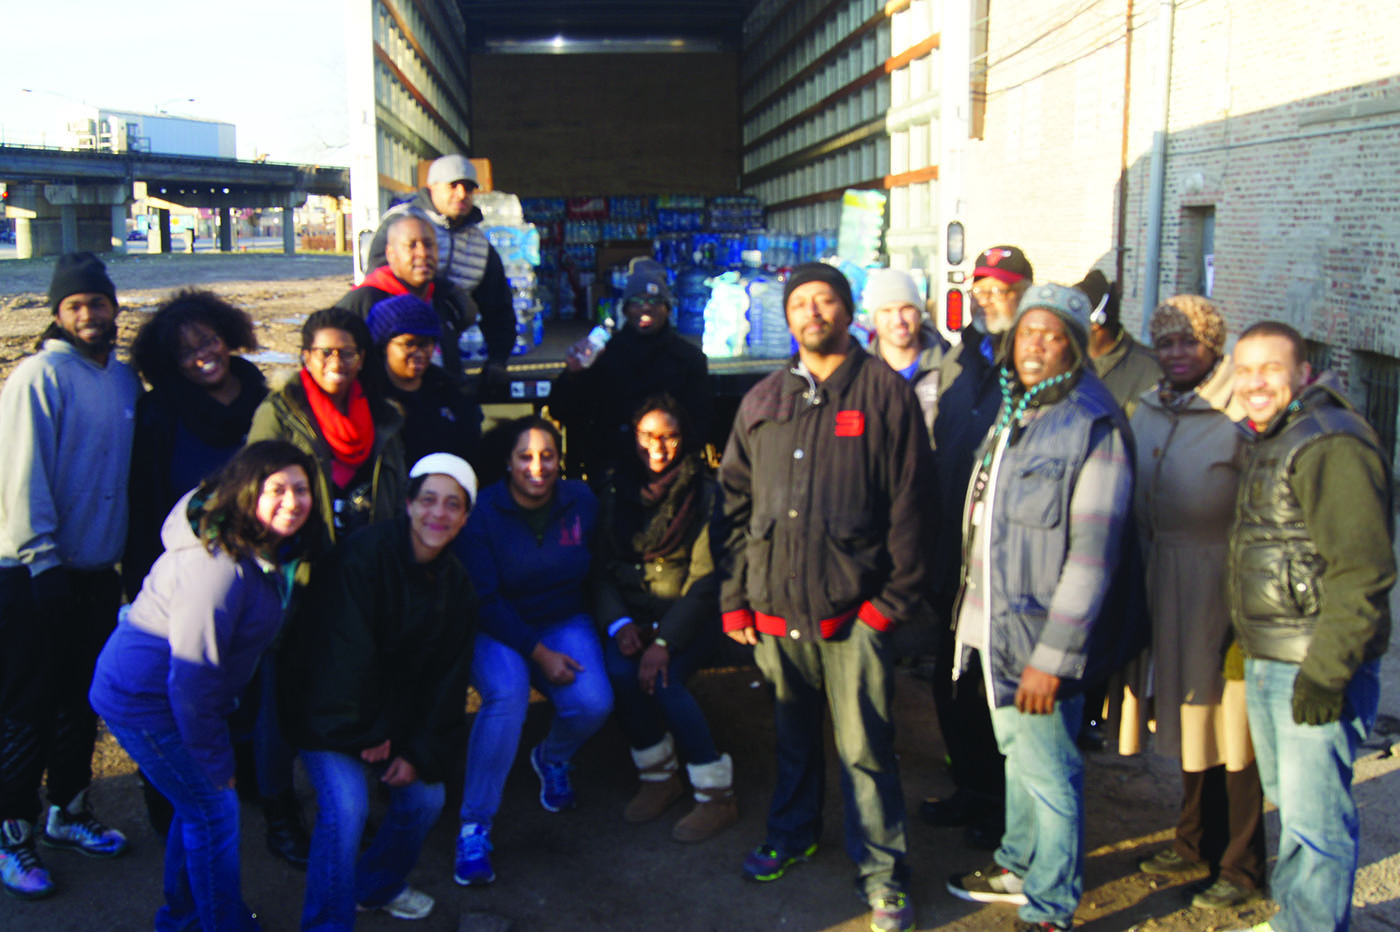 At 7:00 in the morning, Harmony Church Bottled Water drive secures donated water loaded by volunteers with Senior Pastor James Brooks, 24th Ward Alderman Michael Scott Jr, UIC Public Health students and other volunteers.